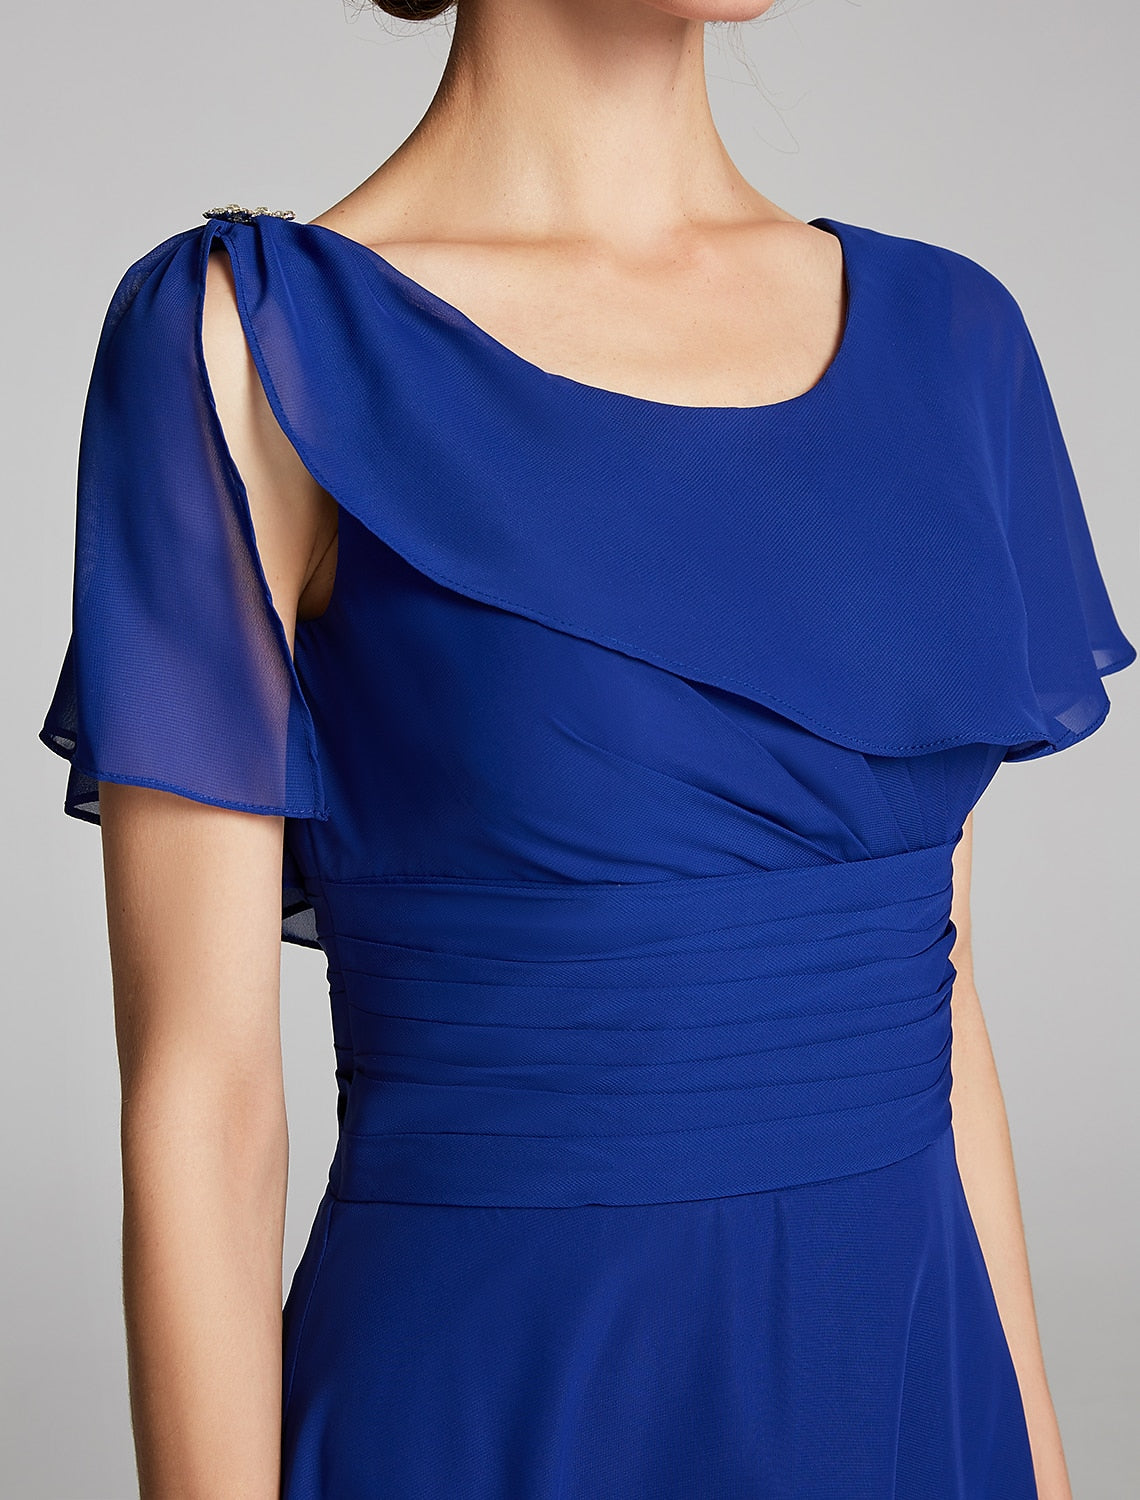 A-Line Mother of the Bride Dress Cowl Neck Knee Length Chiffon Short Sleeve with Ruffles